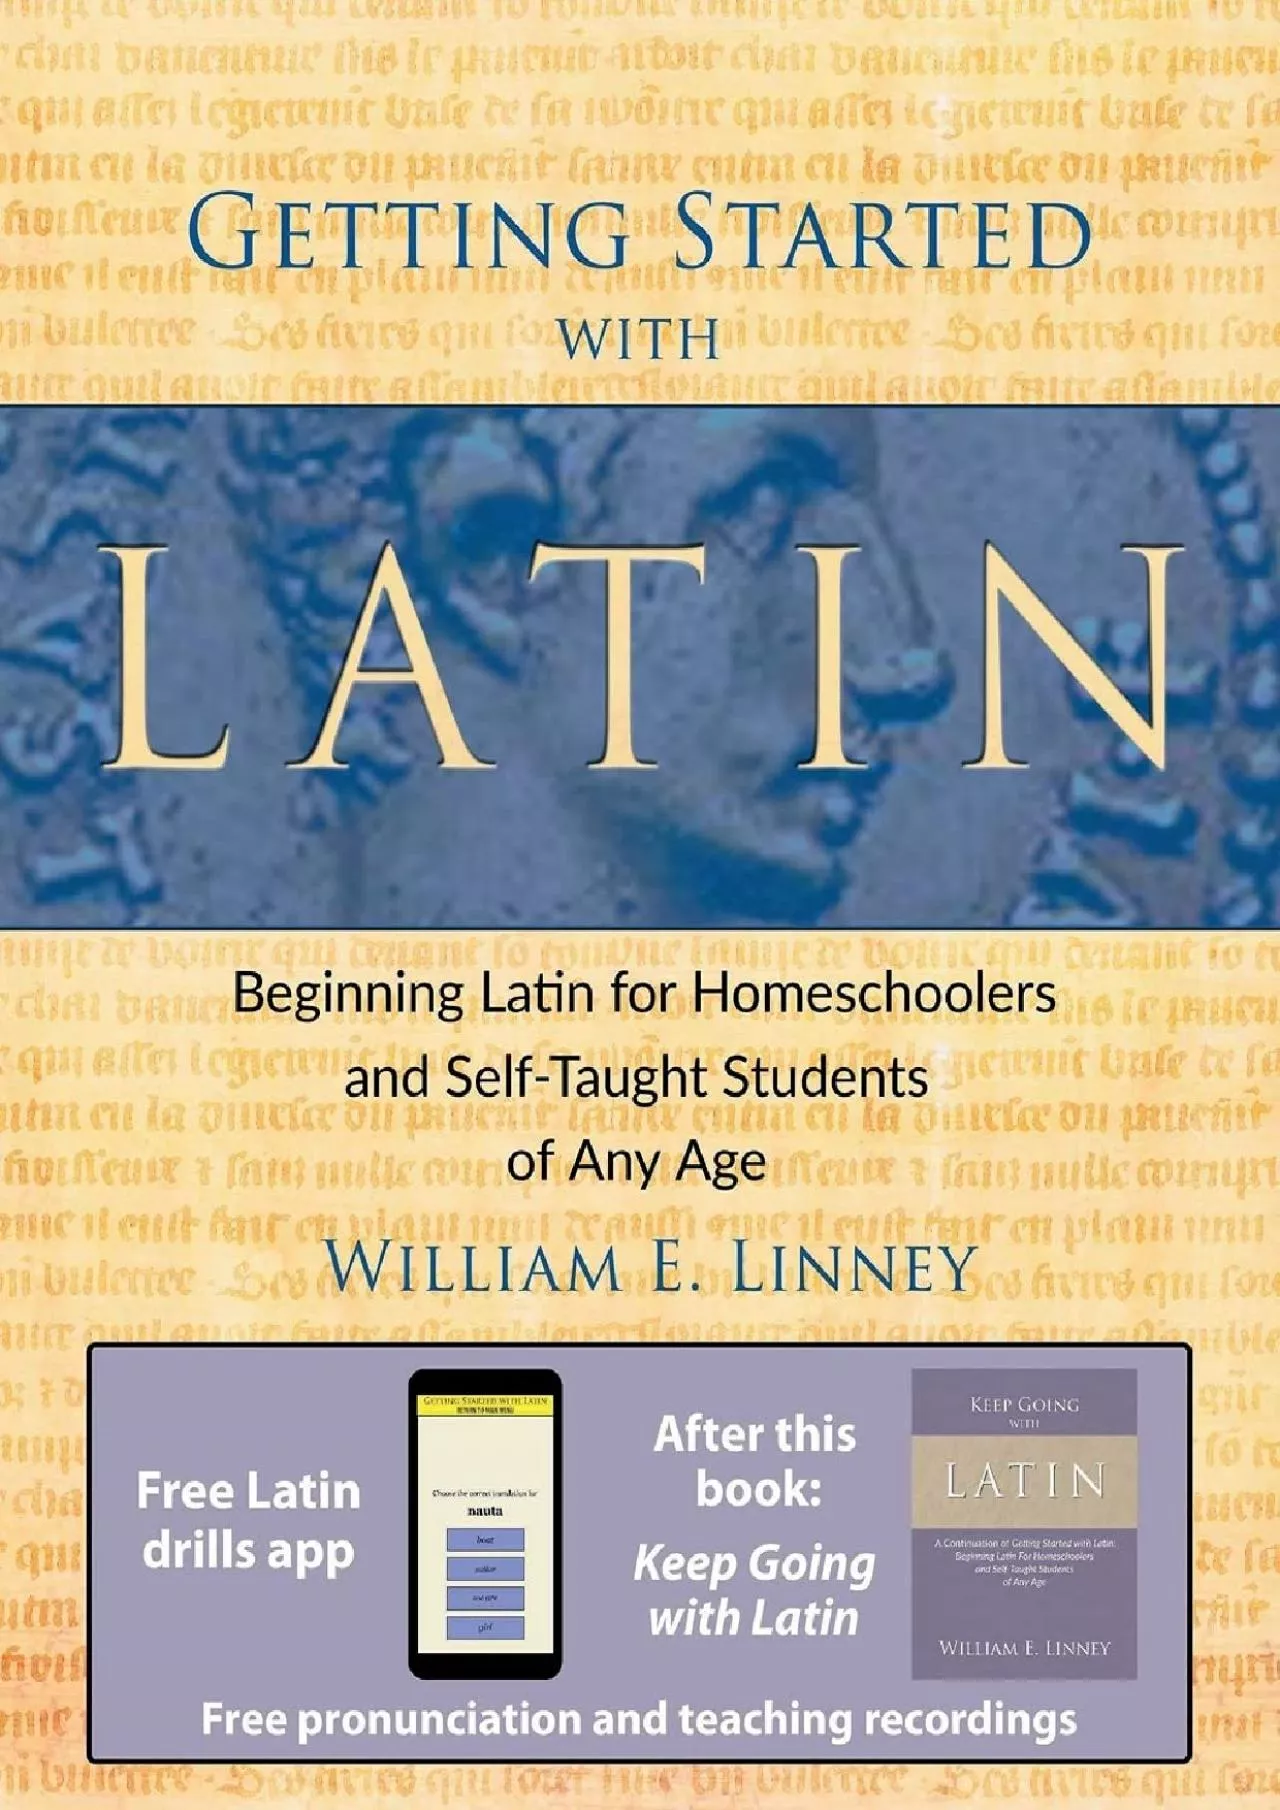 [DOWNLOAD] Getting Started with Latin: Beginning Latin for Homeschoolers and Self-Taught